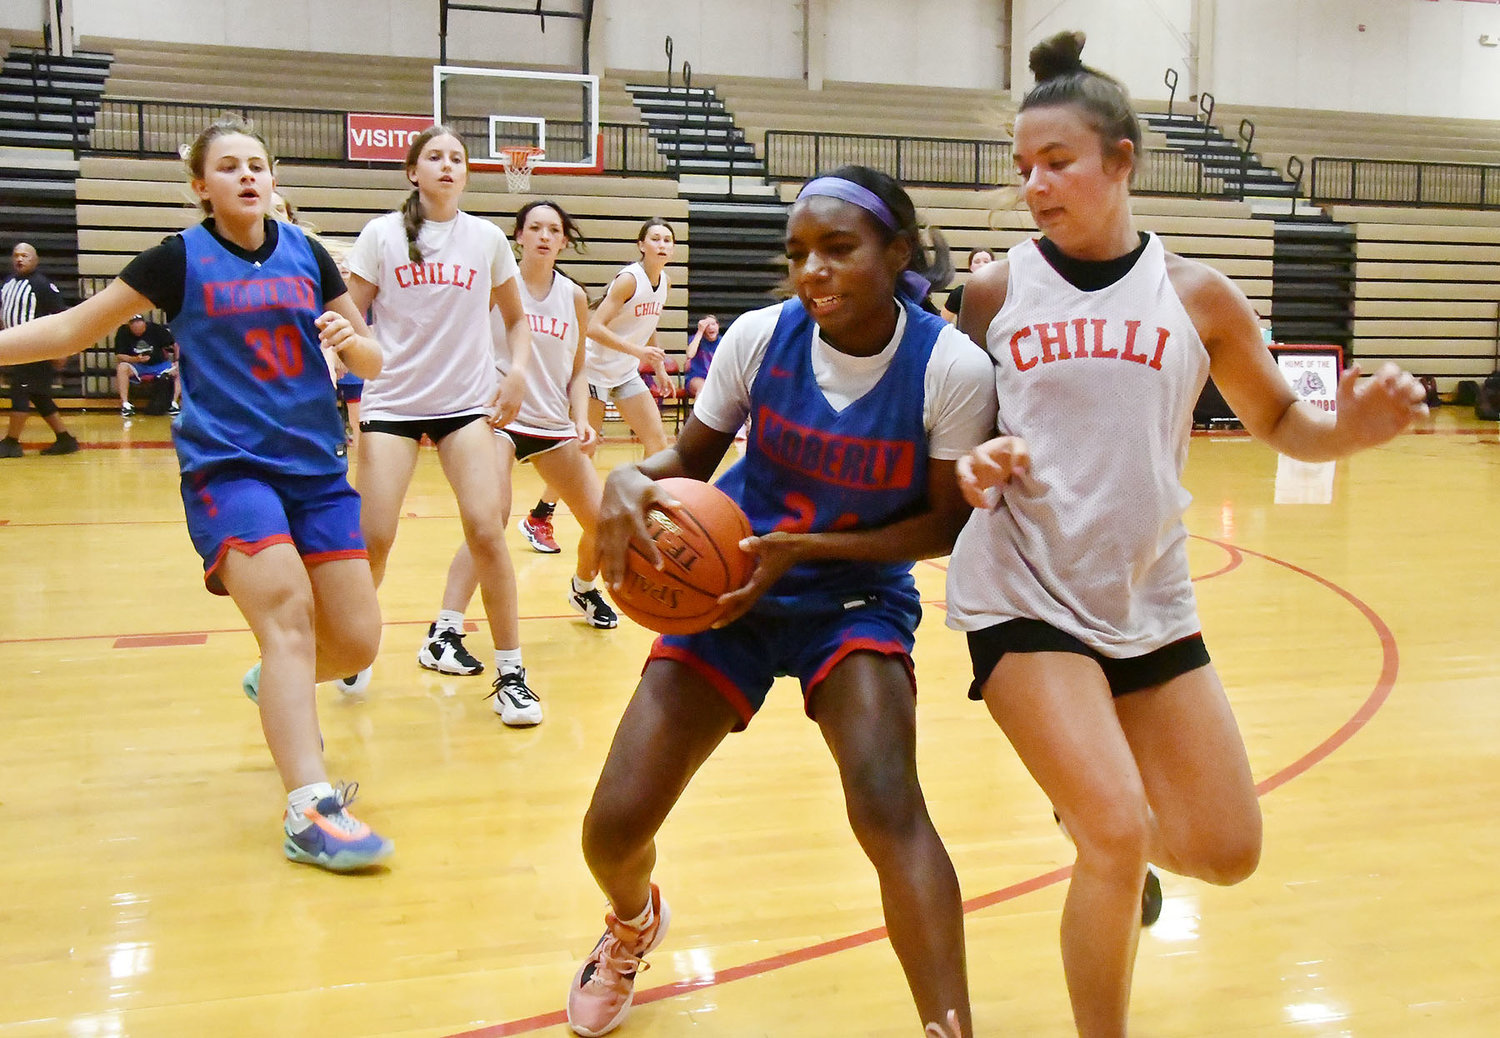 Moberly's Anyja Hayes grabs a rebound near the boundary during a scrimmage against Chillicothe. The Spartans earned a double-digit win.